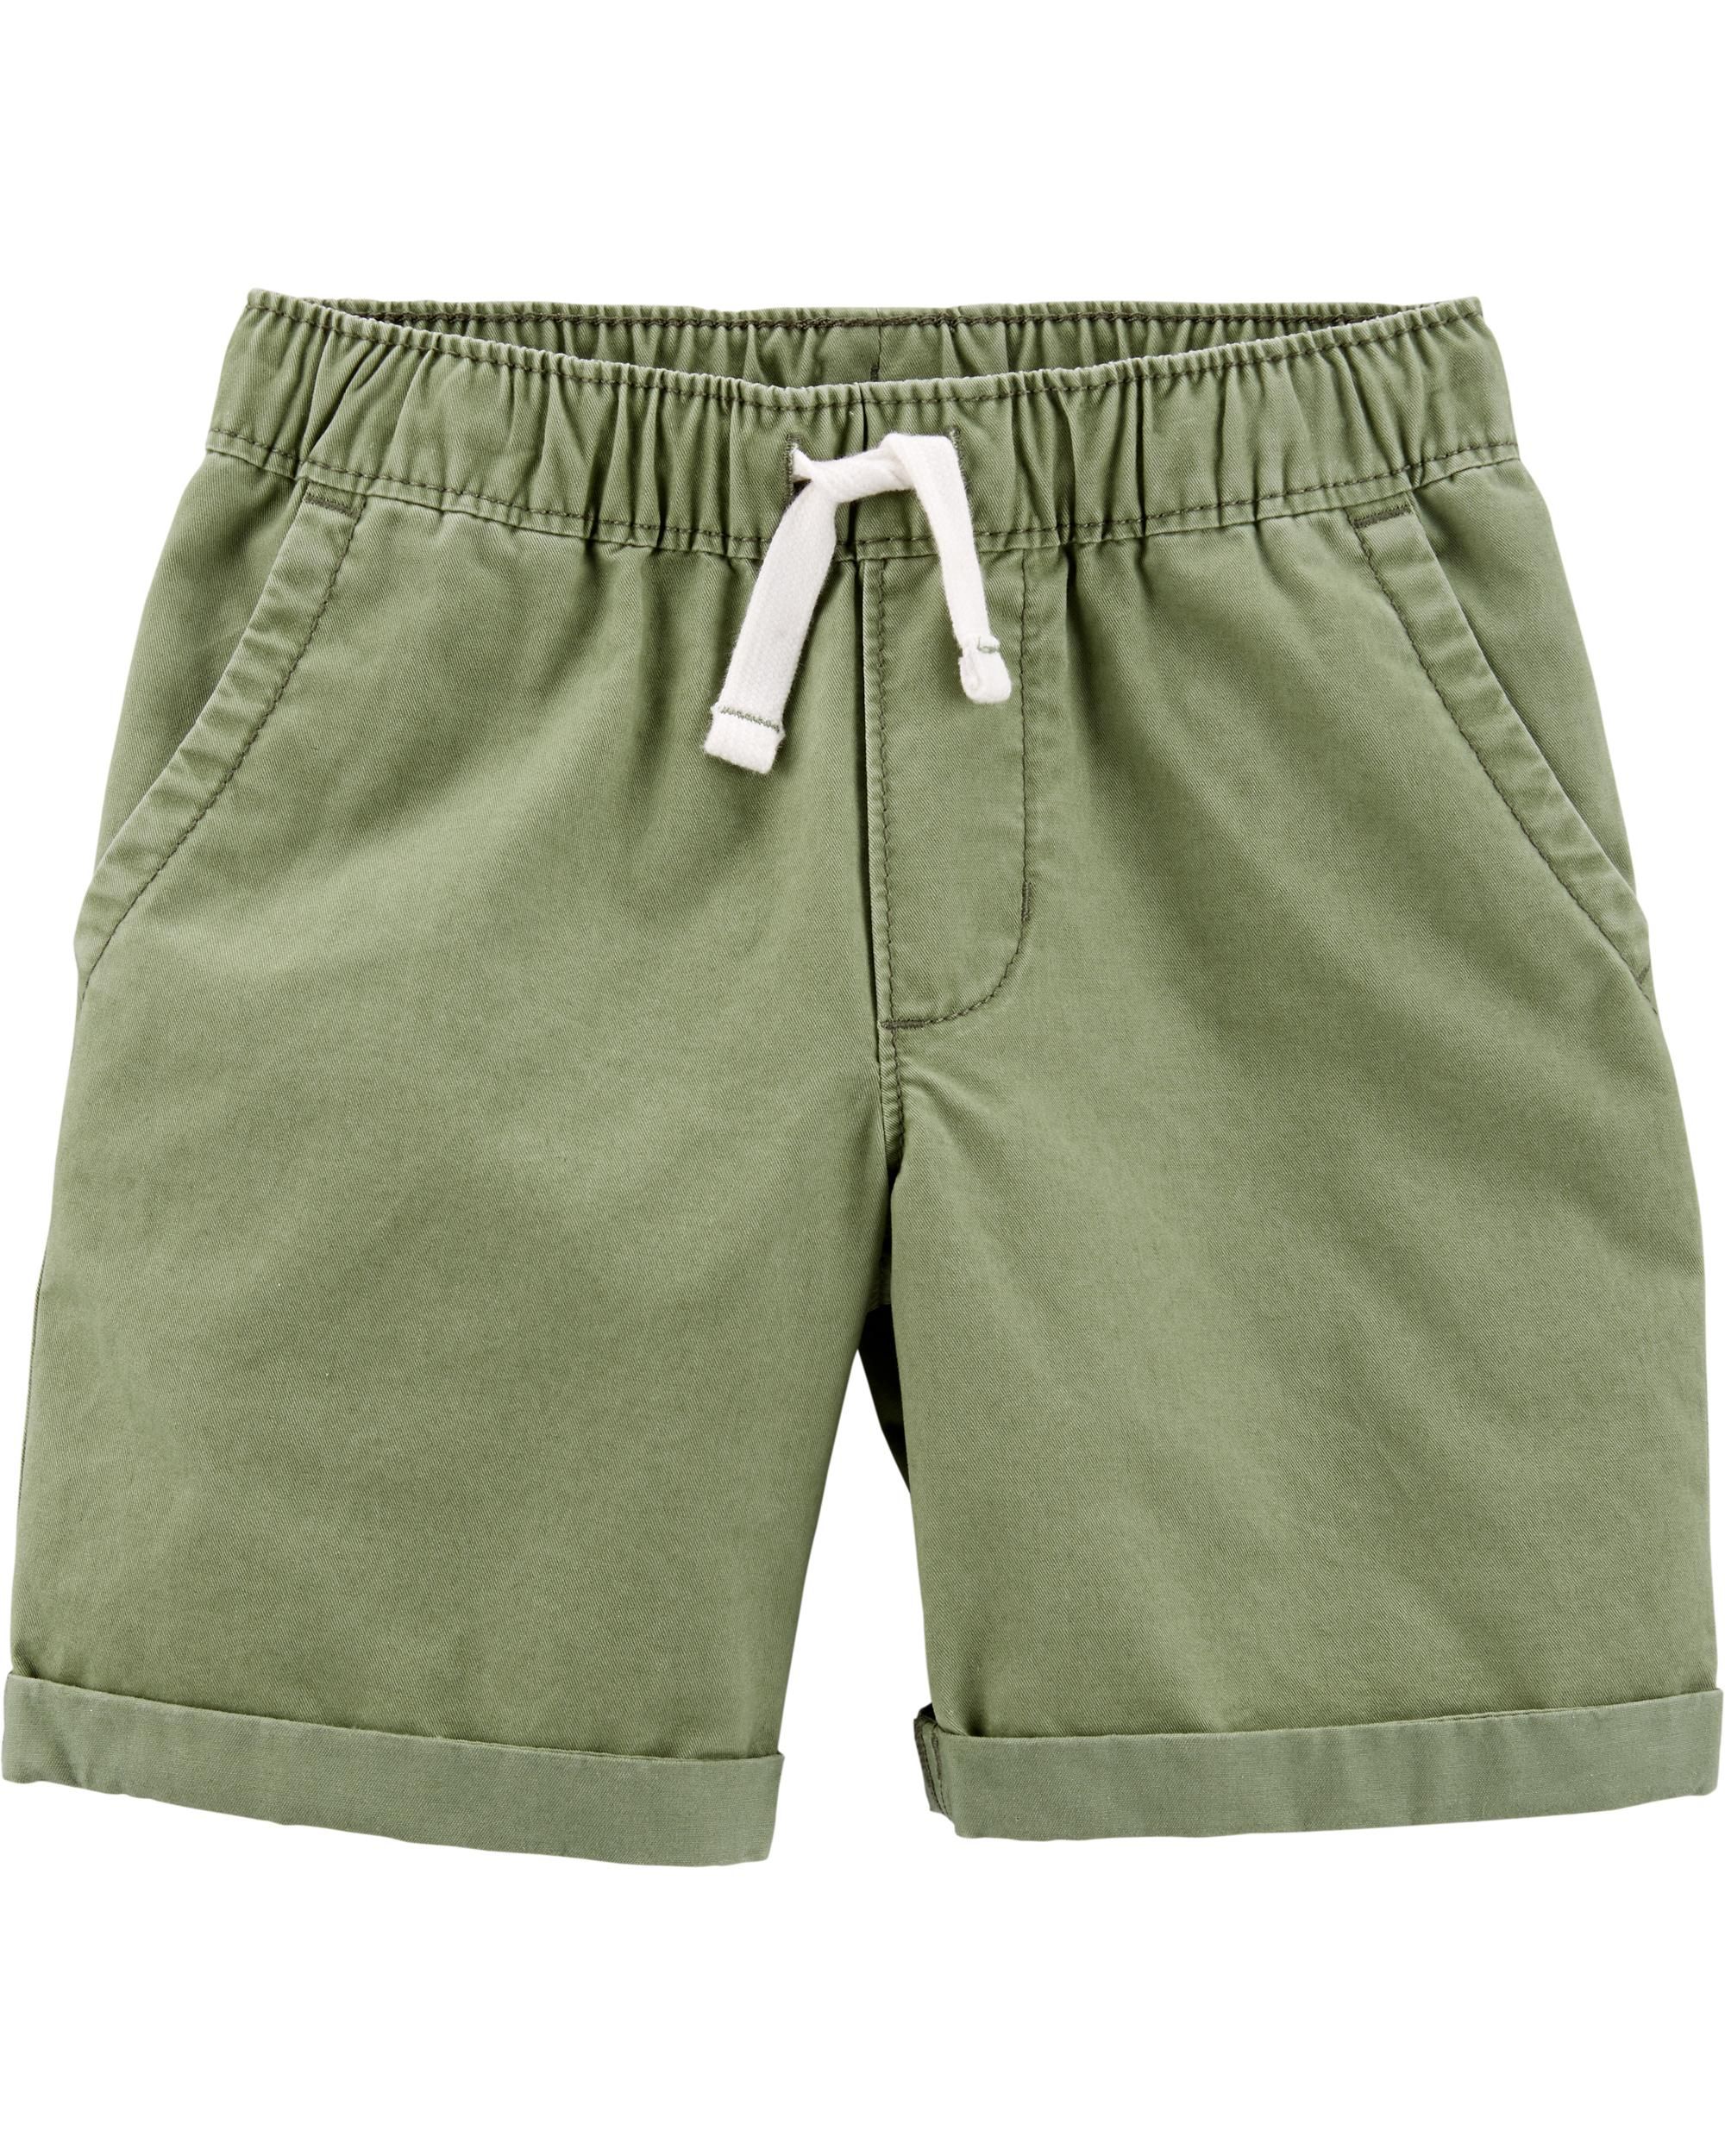 Pull-On Twill Shorts | carters.com | Carter's